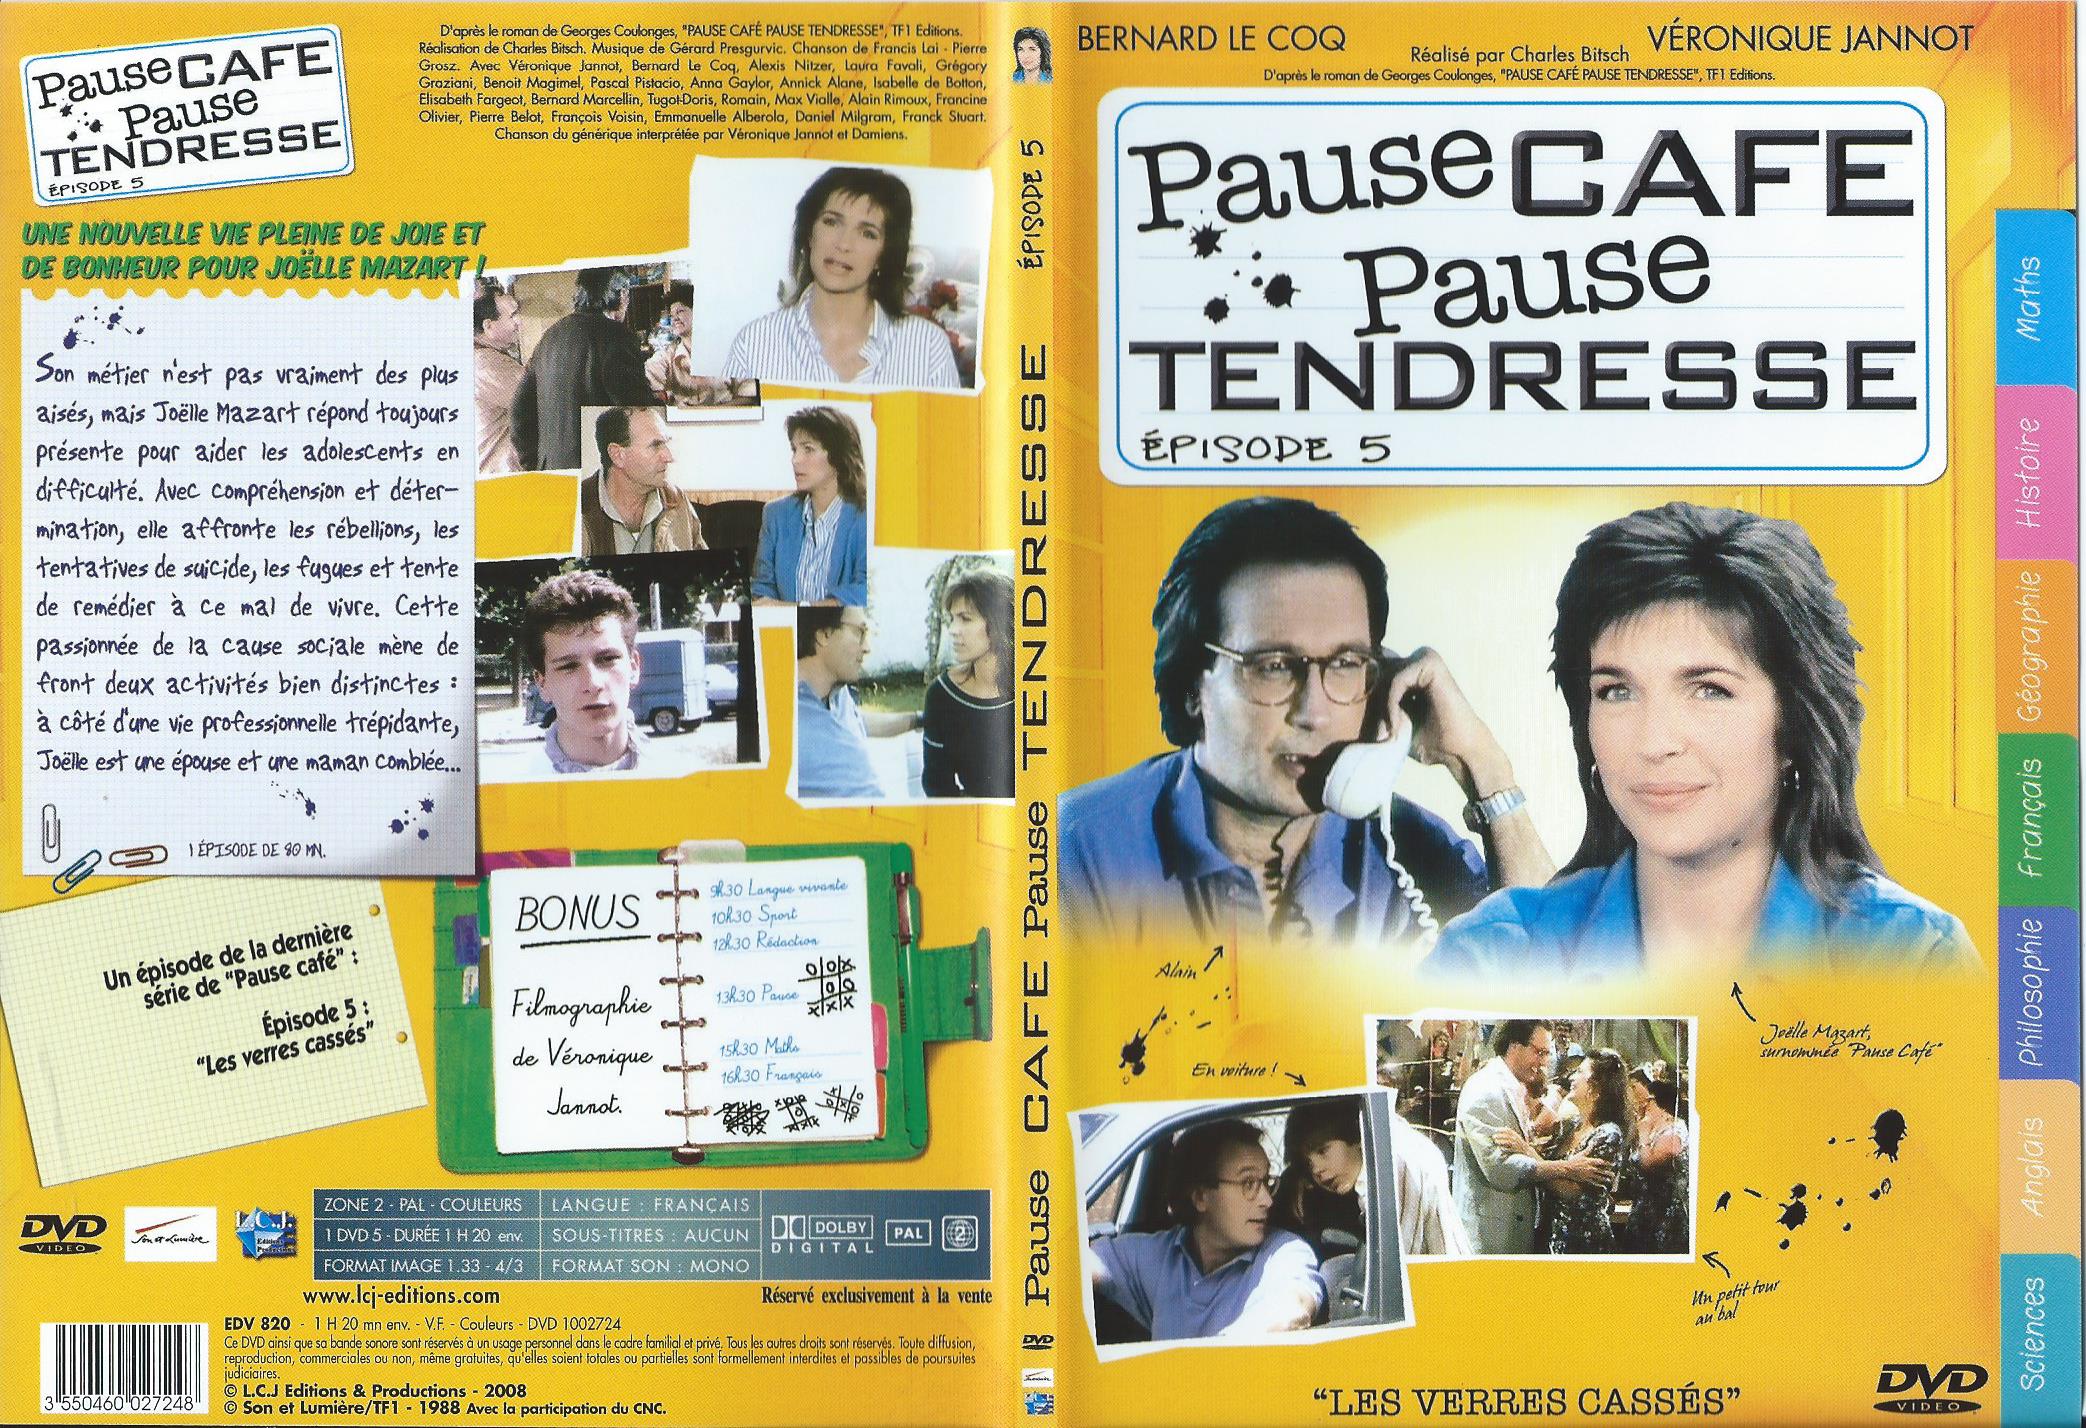 Jaquette DVD Pause Caf, Pause Tendresse DVD 5